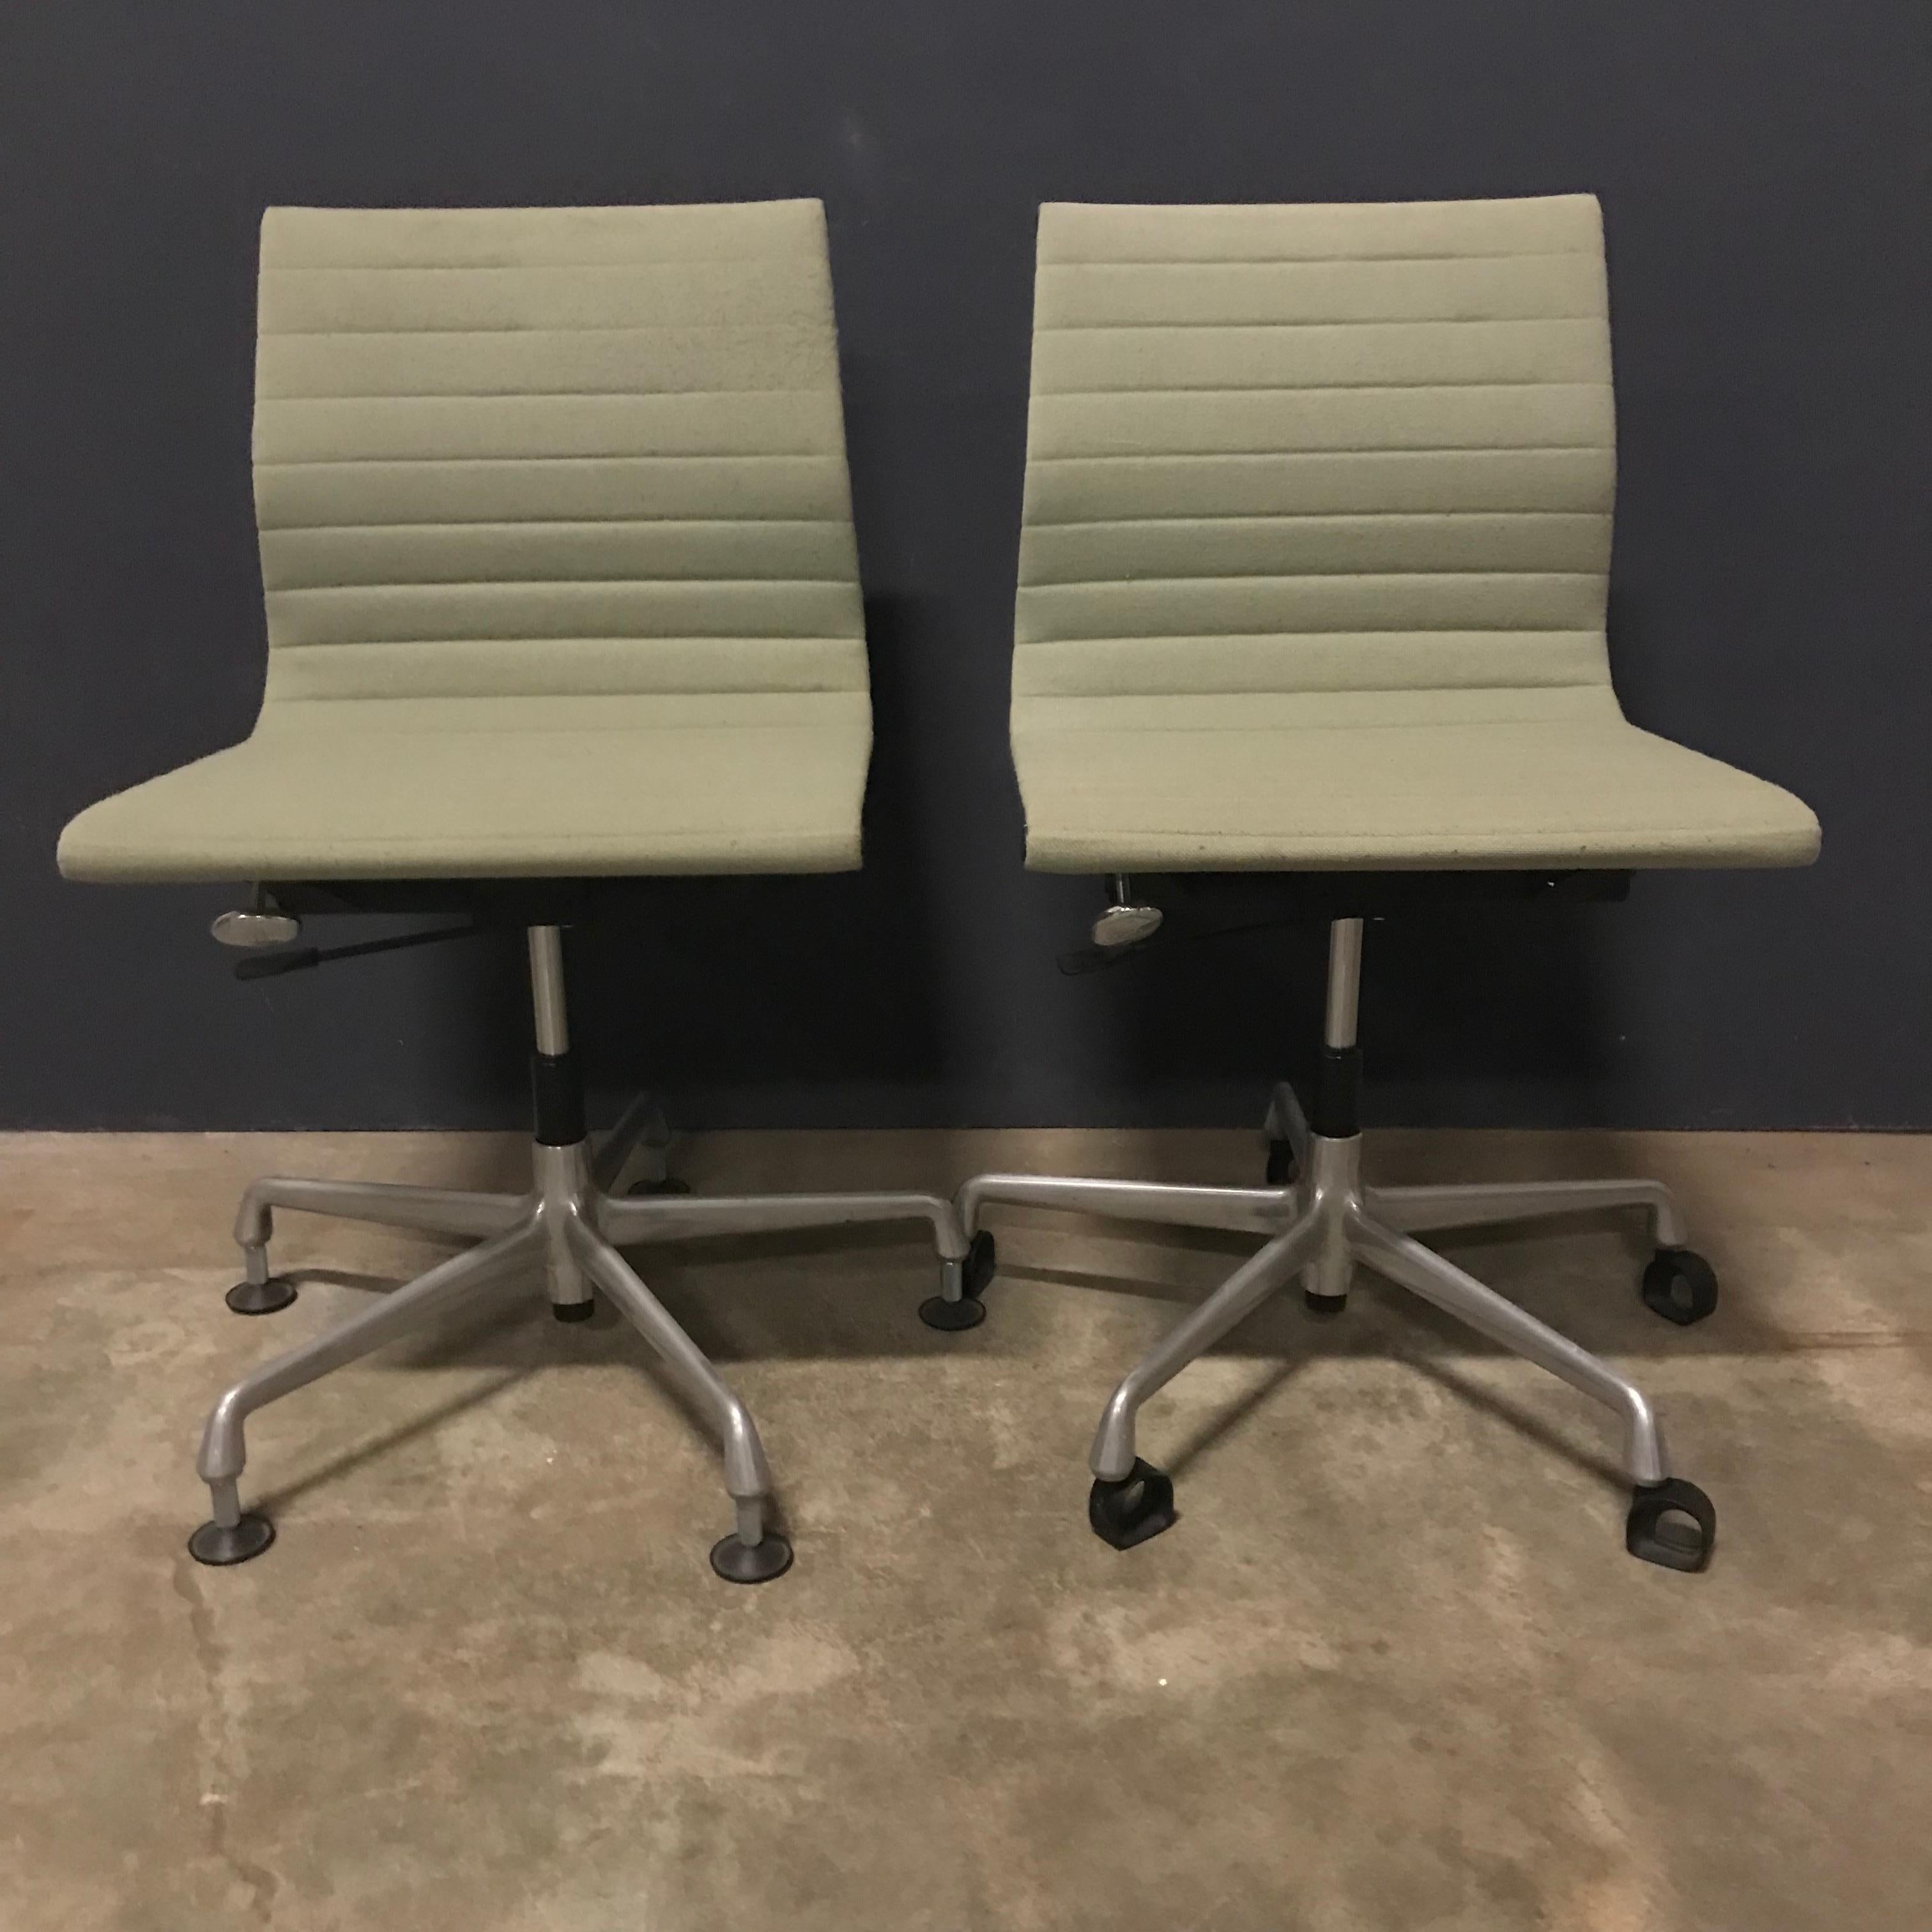 Mid-Century Modern 1958 Ray and Charles Eames, Fabric, Adjust, Tilt 2 Office Chair 4 Wheels No Arms For Sale